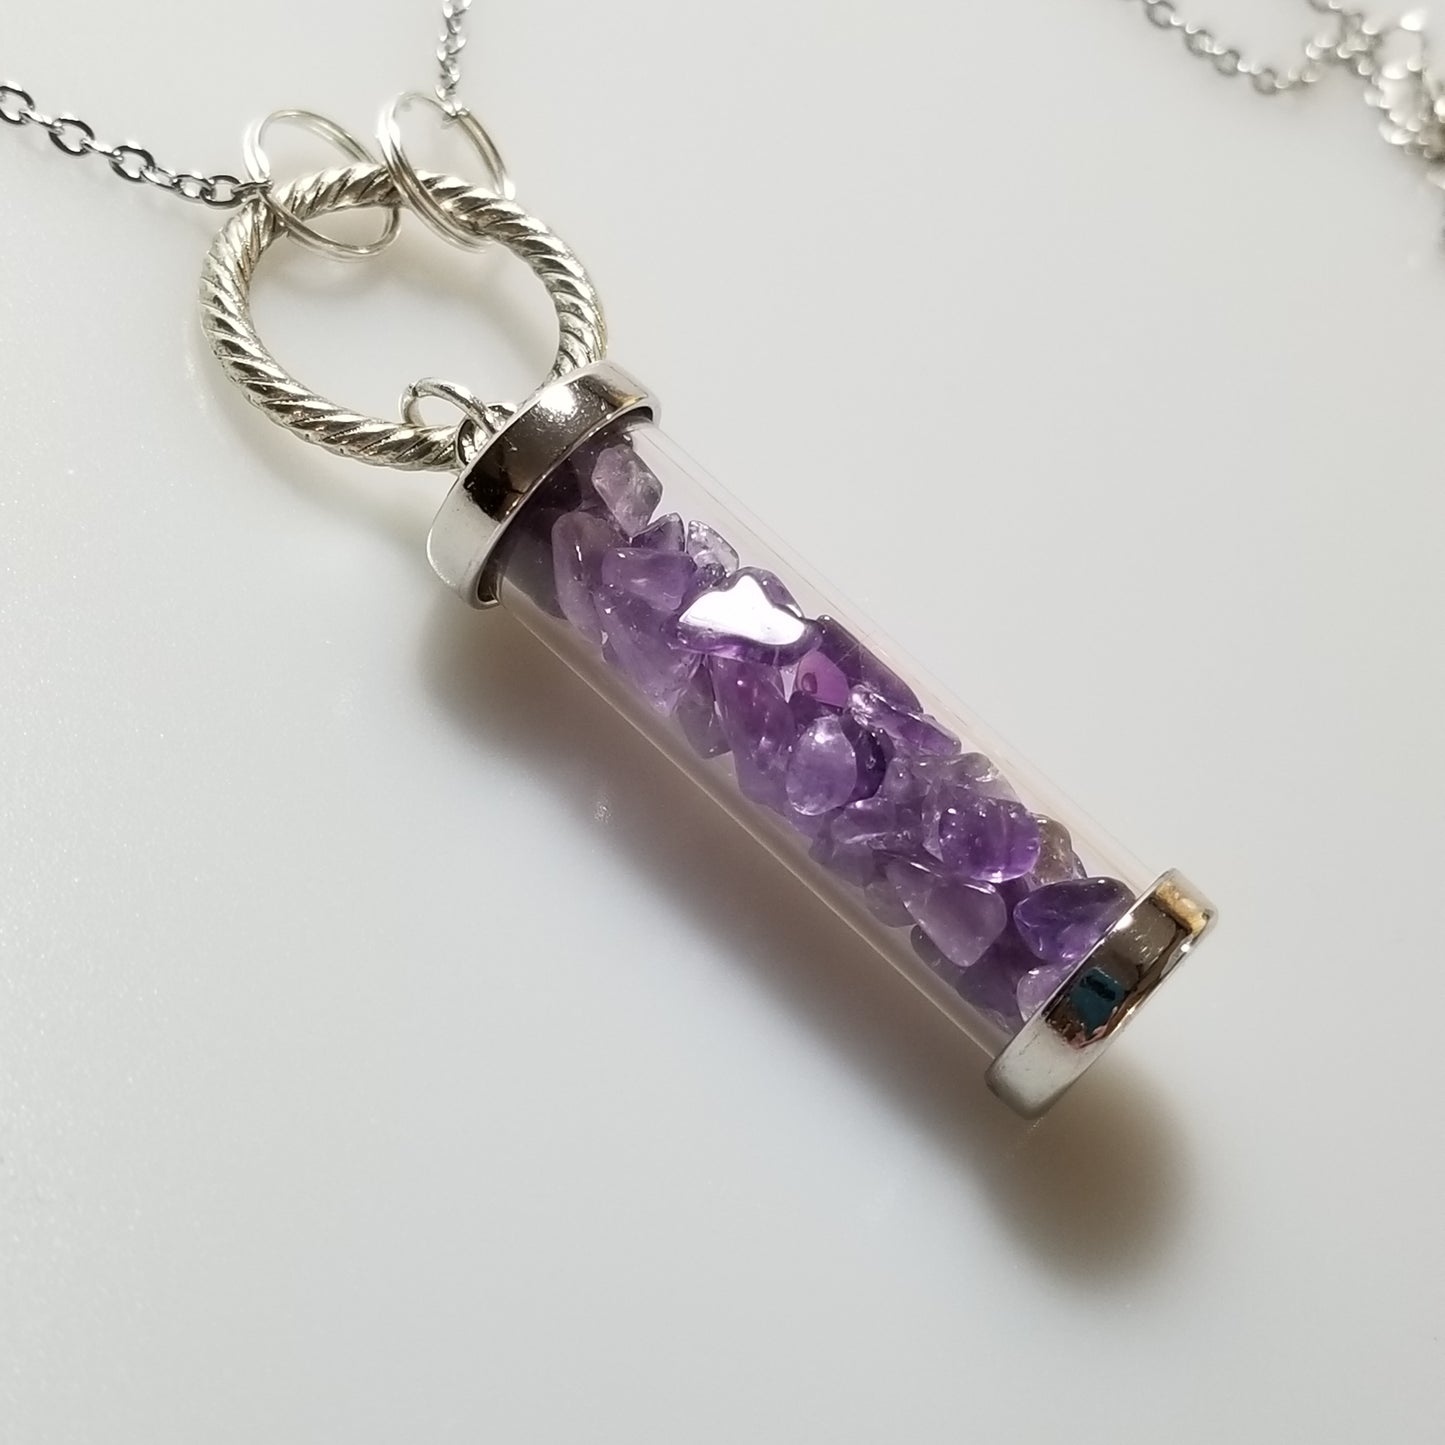 Healing Amethyst Necklace, Silver Jewelry